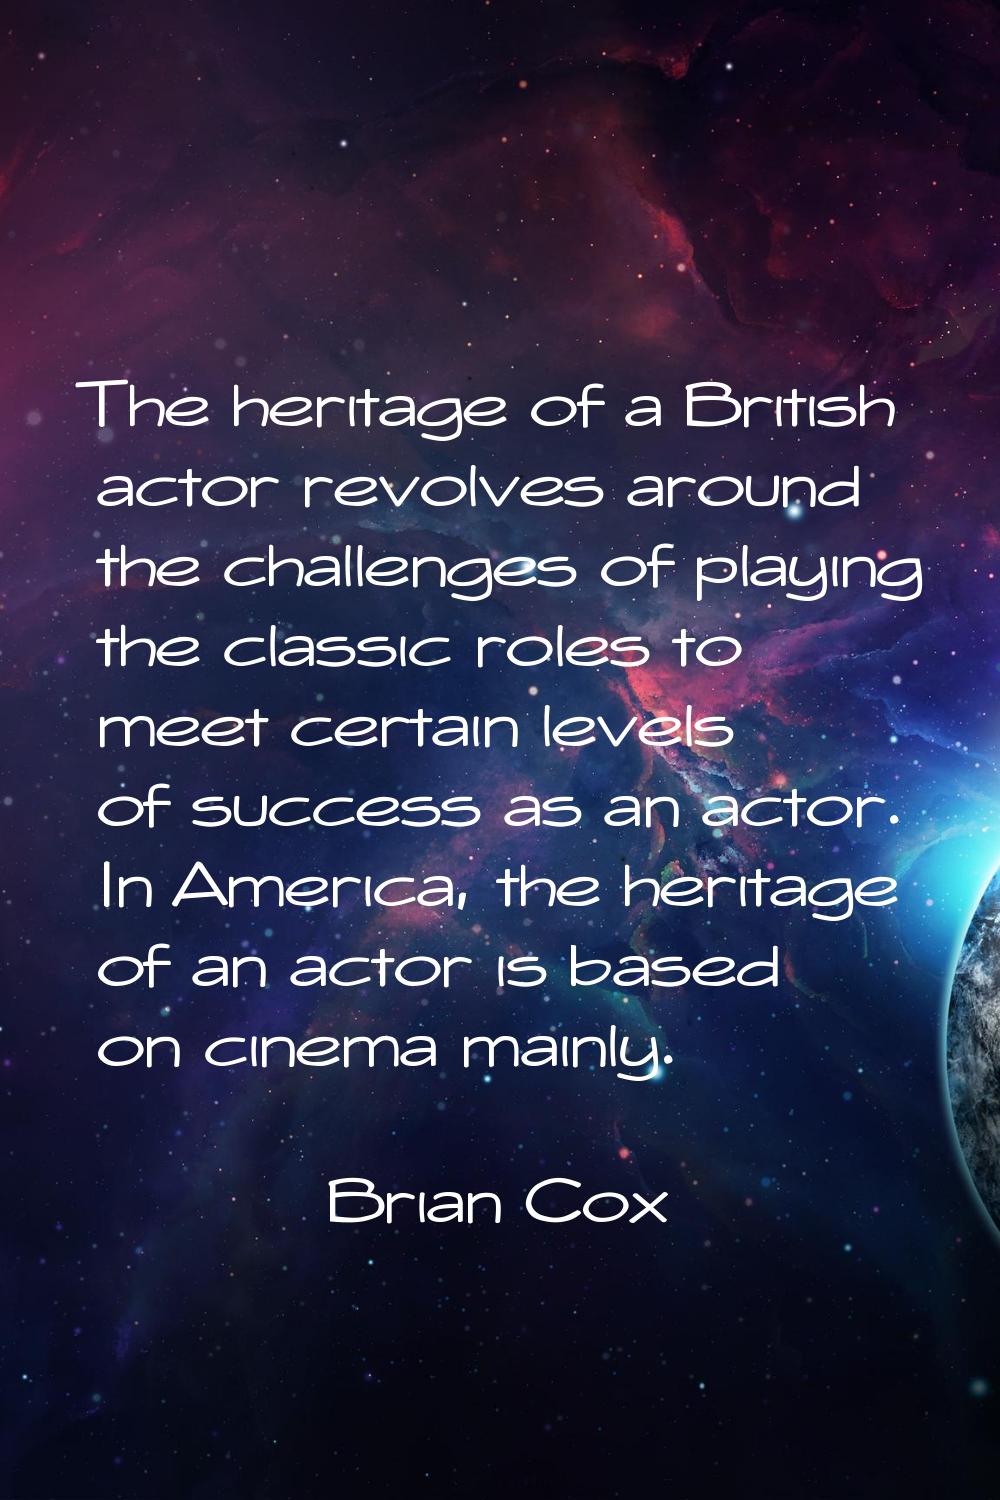 The heritage of a British actor revolves around the challenges of playing the classic roles to meet